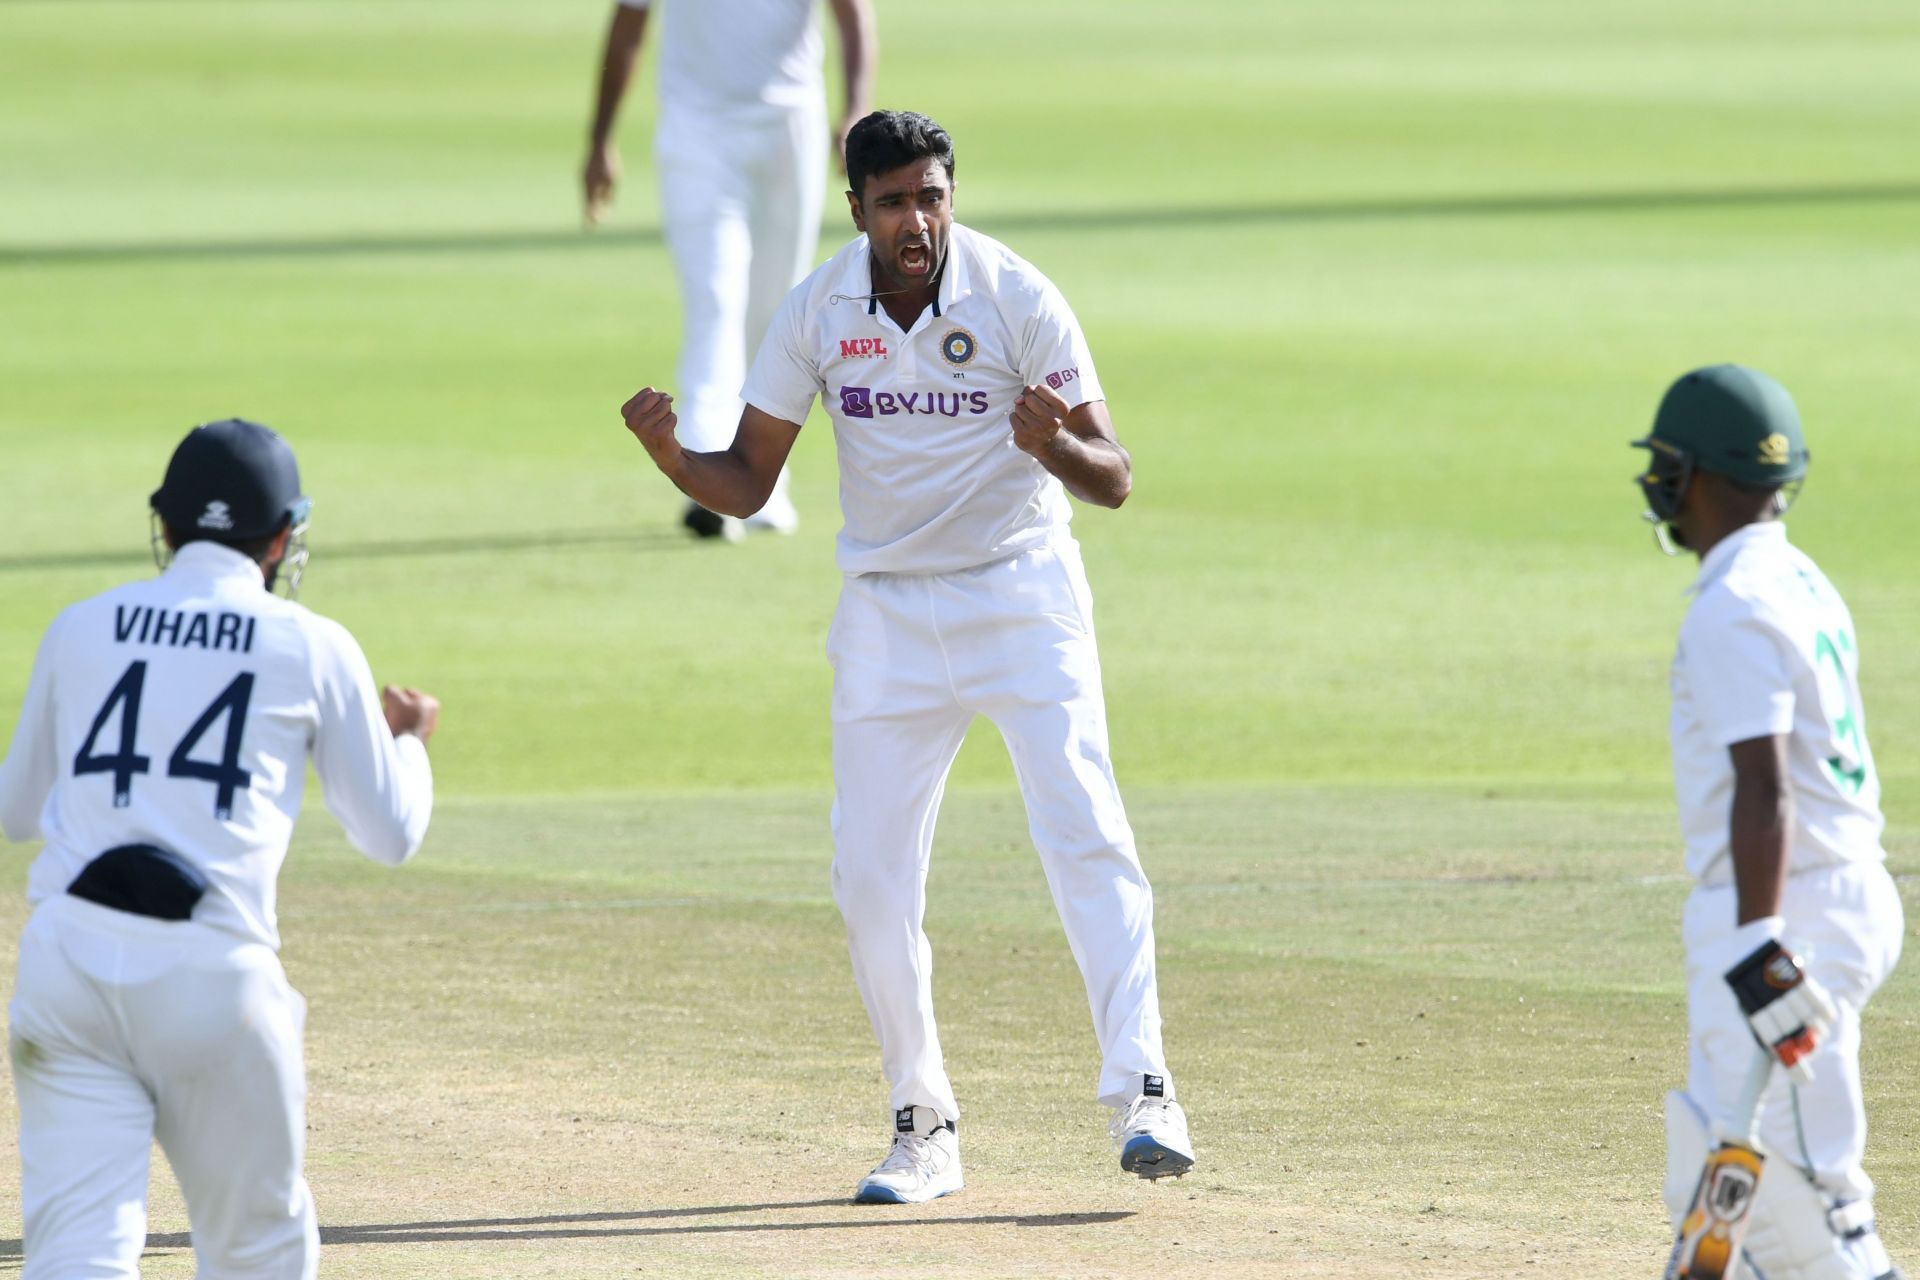 Ravichandran Ashwin picked up just three wickets in the Test series against South Africa